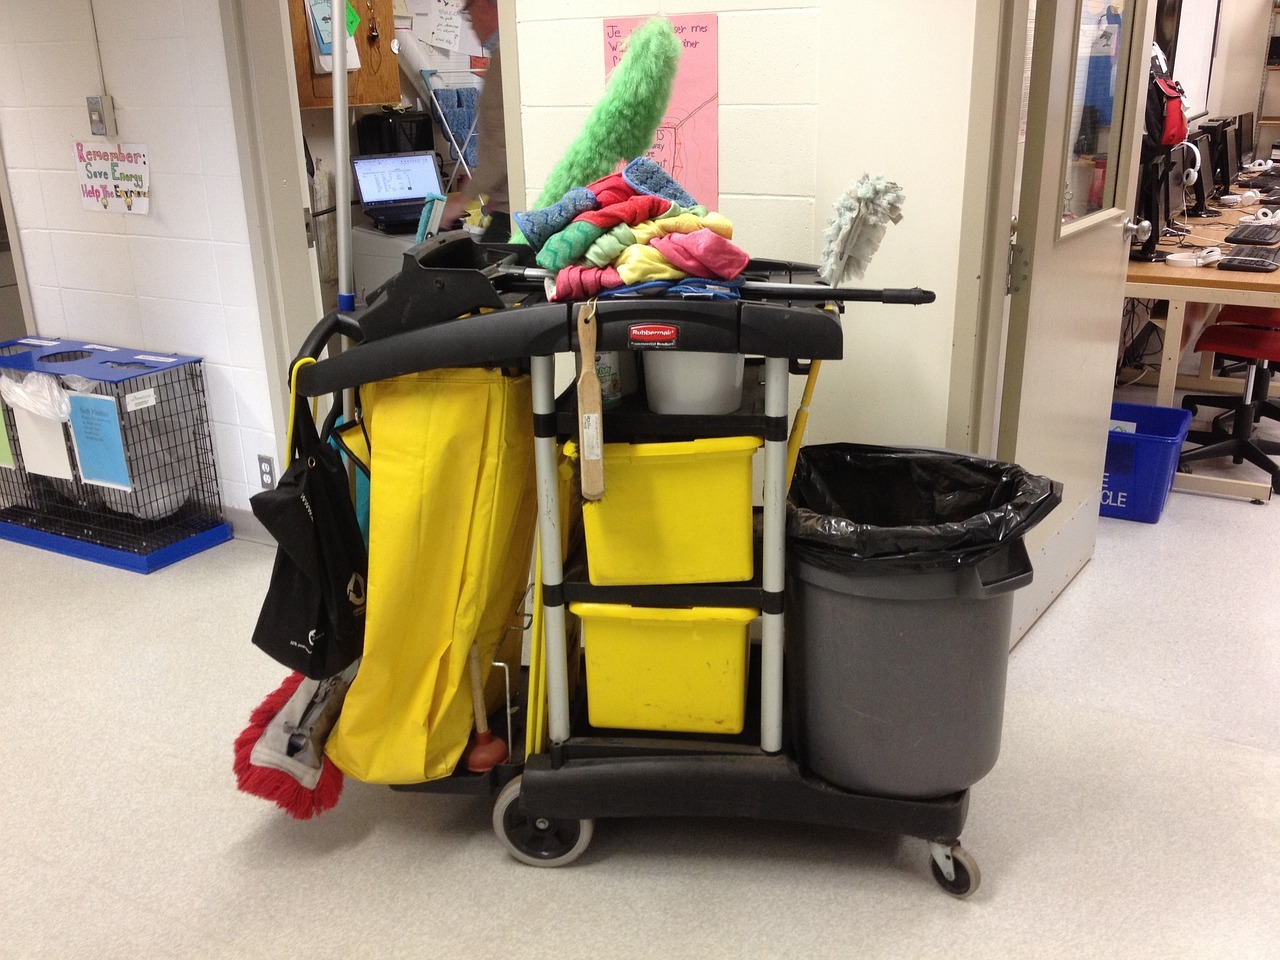 Janitorial cart with towels on top and a large garbage bin on the right. The cart is parked in front of a door of a room full of desks and computers